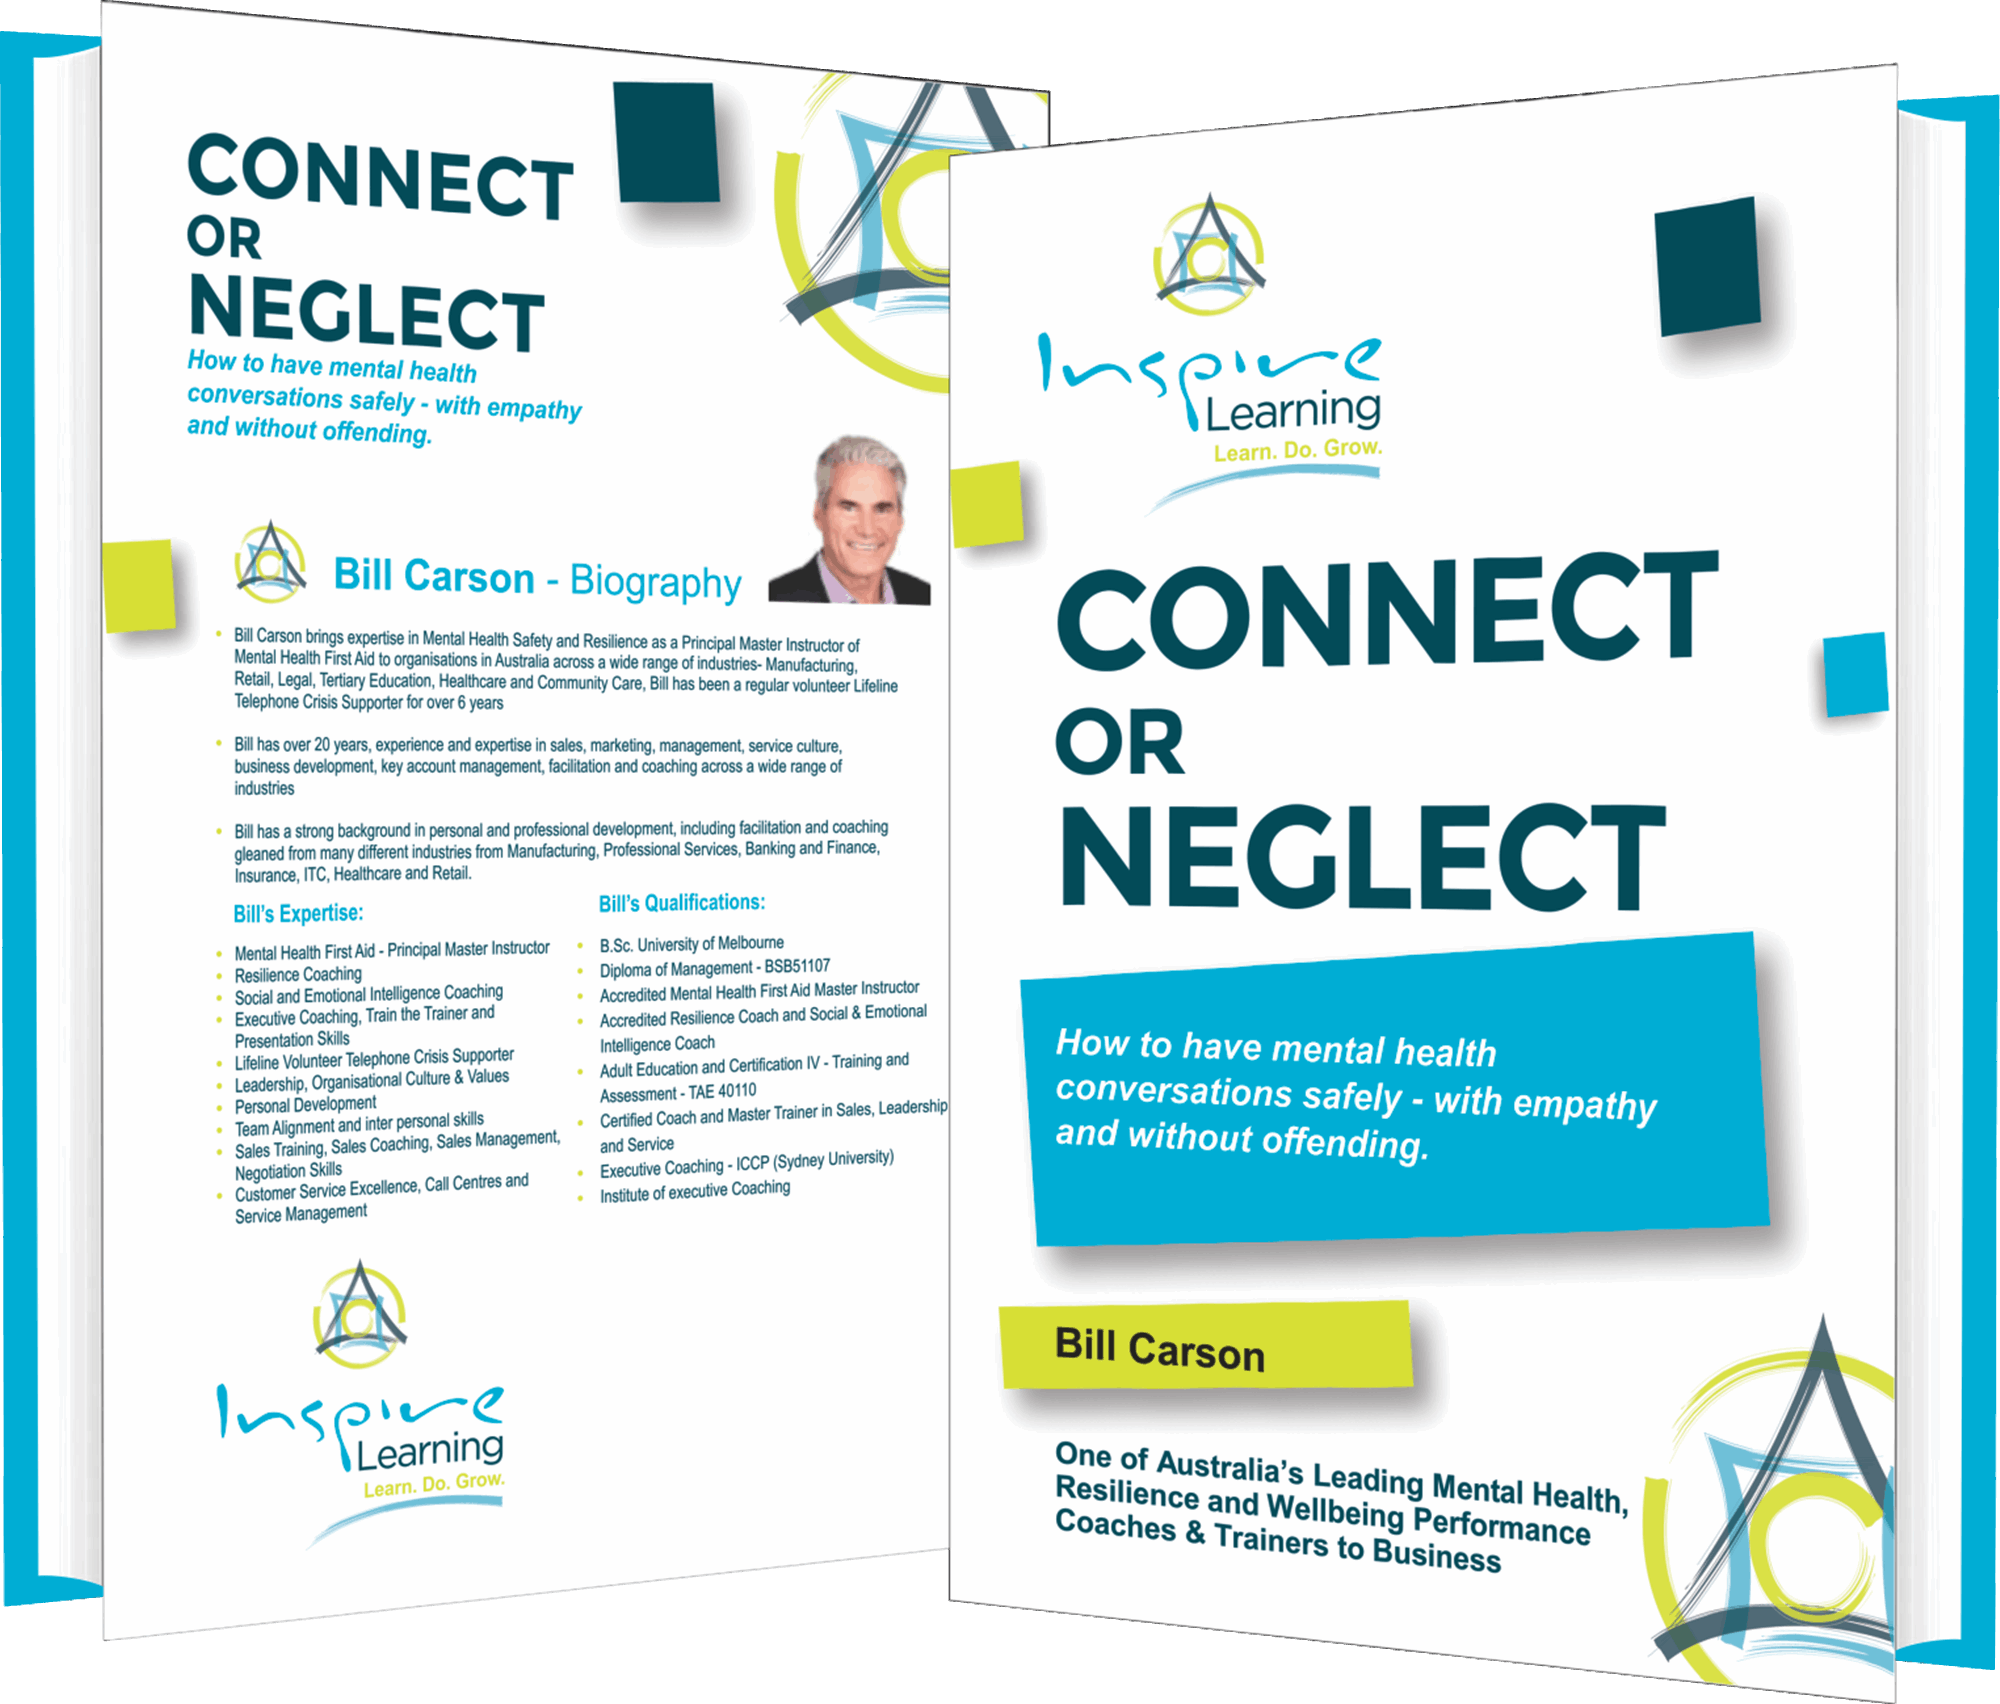 Connect or neglect: Managing Team Mental Health